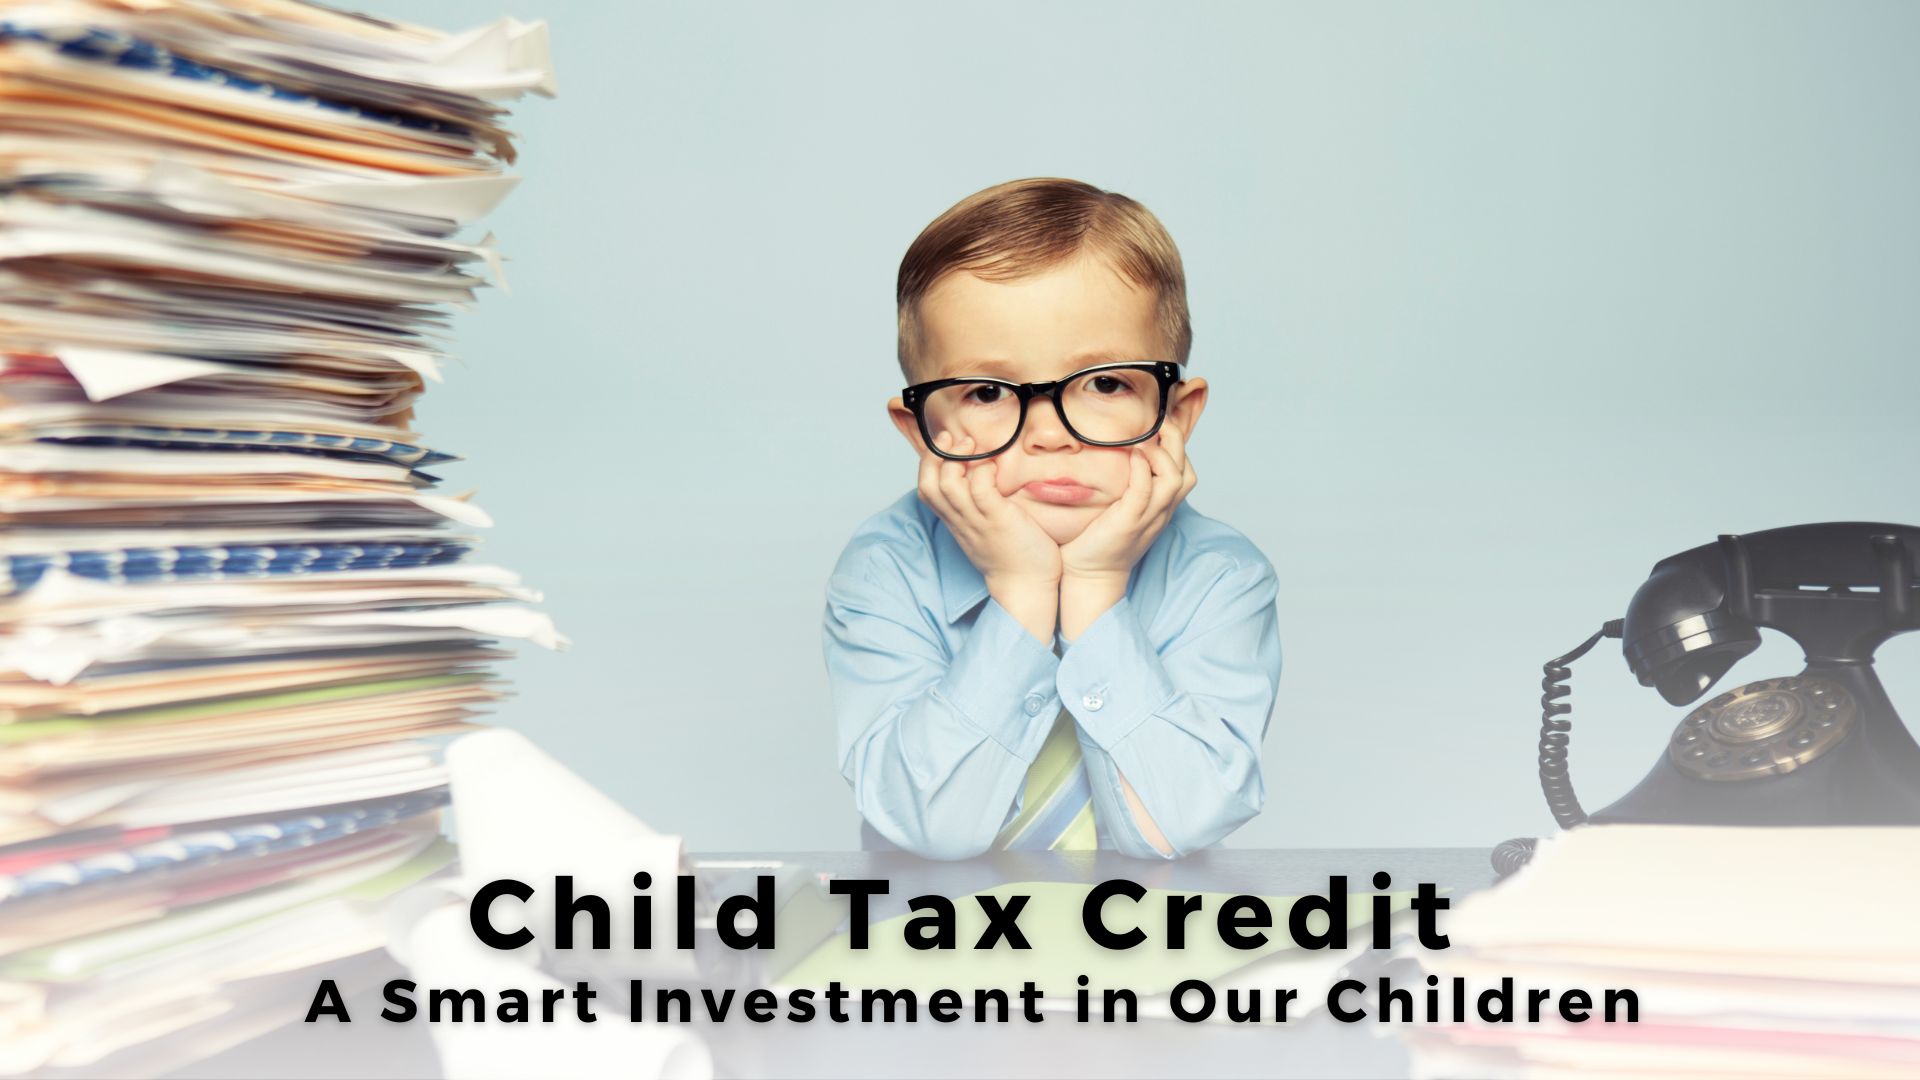 Smiling child holding his face, symbolizing the financial support and opportunities provided by the Child Tax Credit.